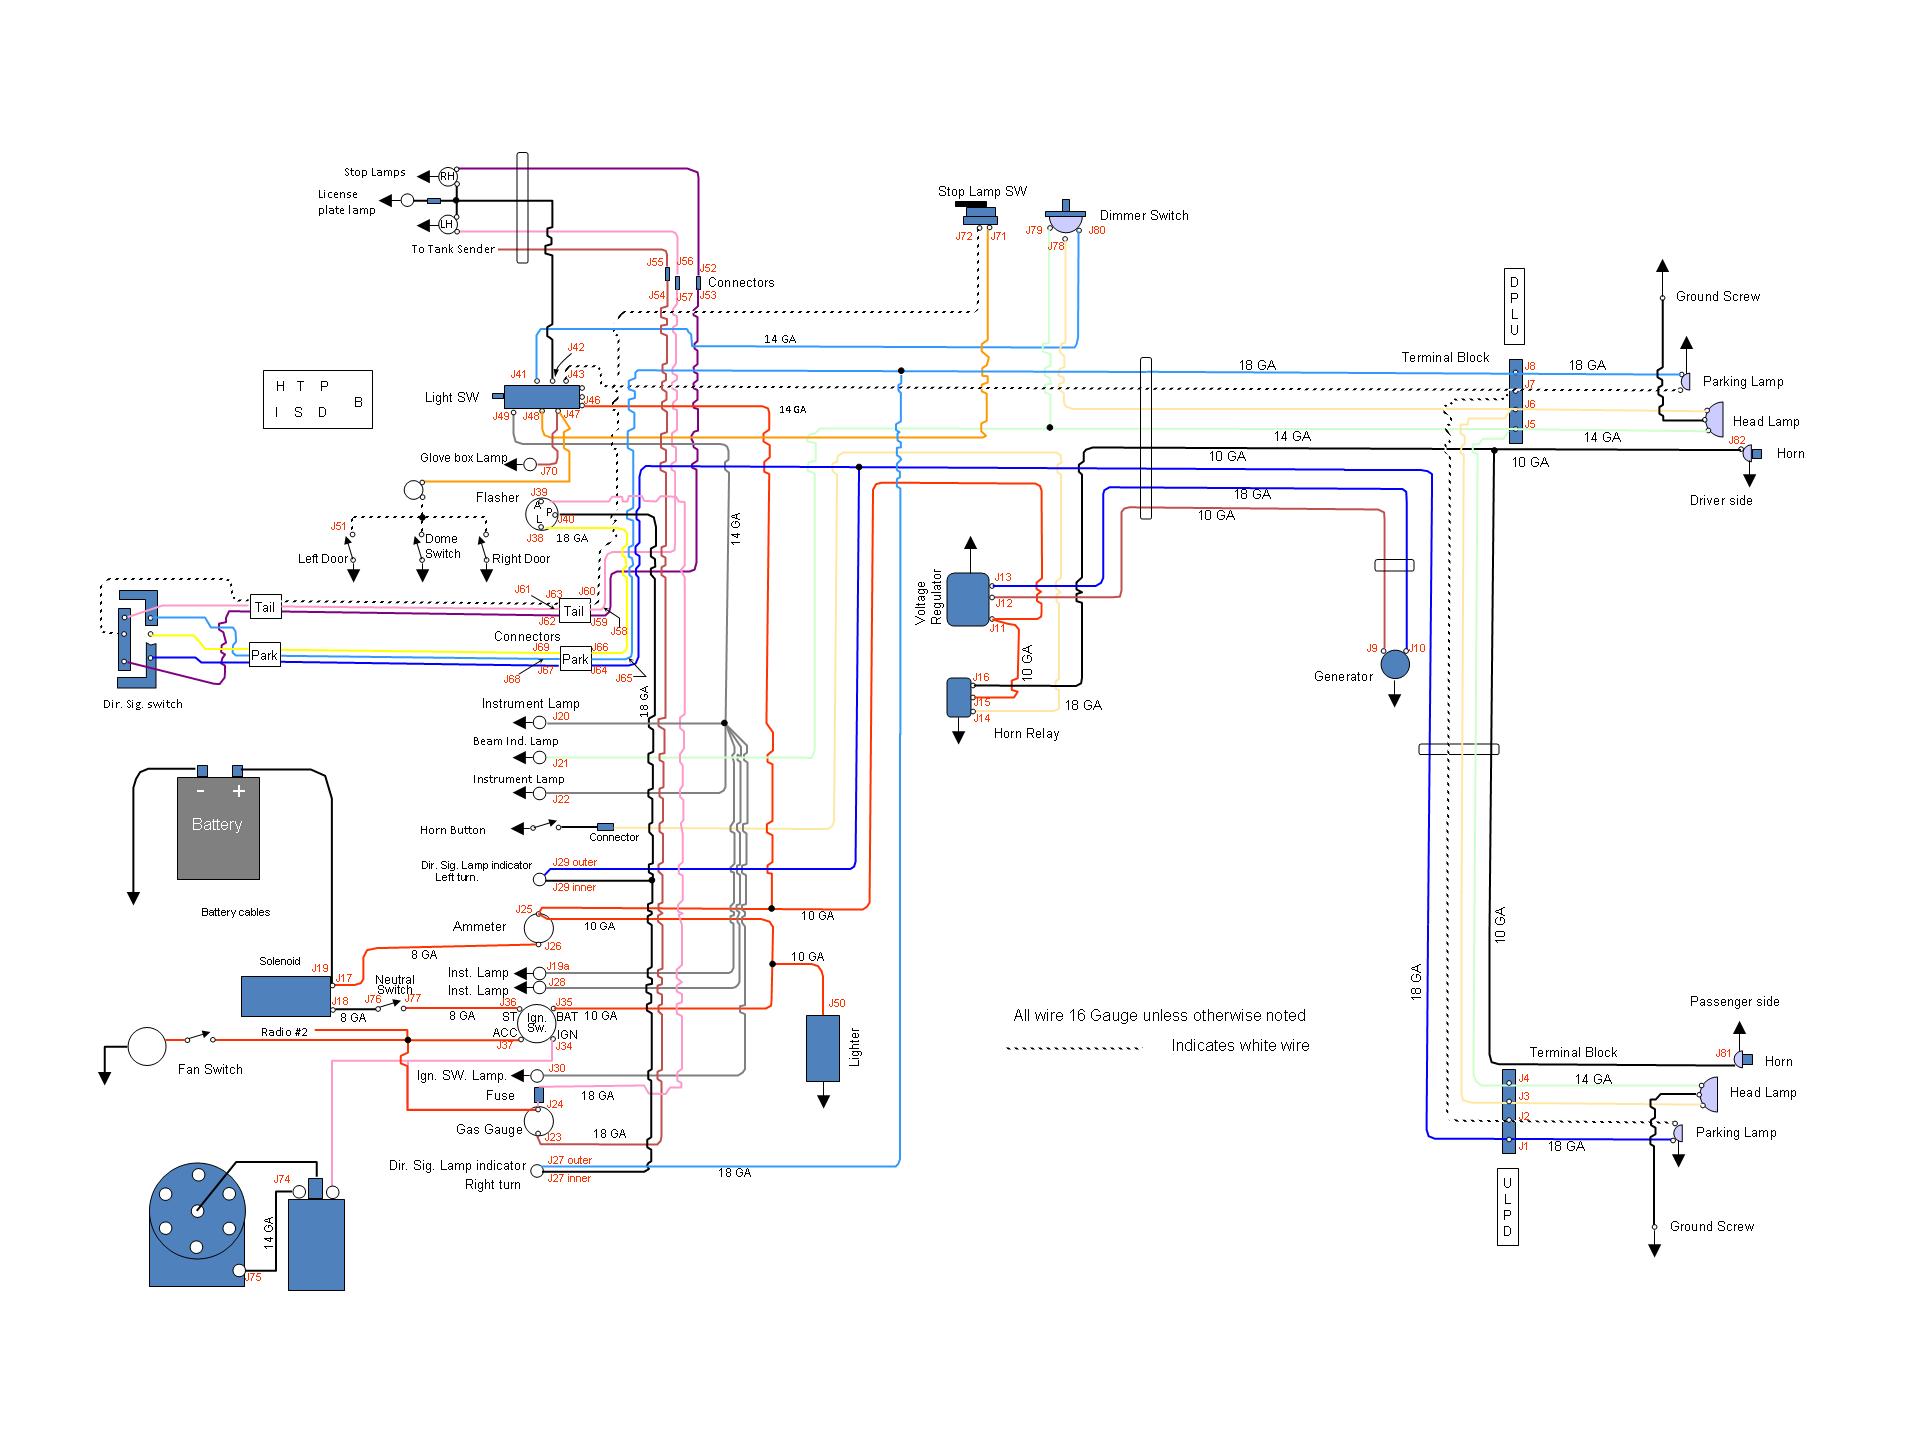 Where can you find online diagrams of Chevy wiring?